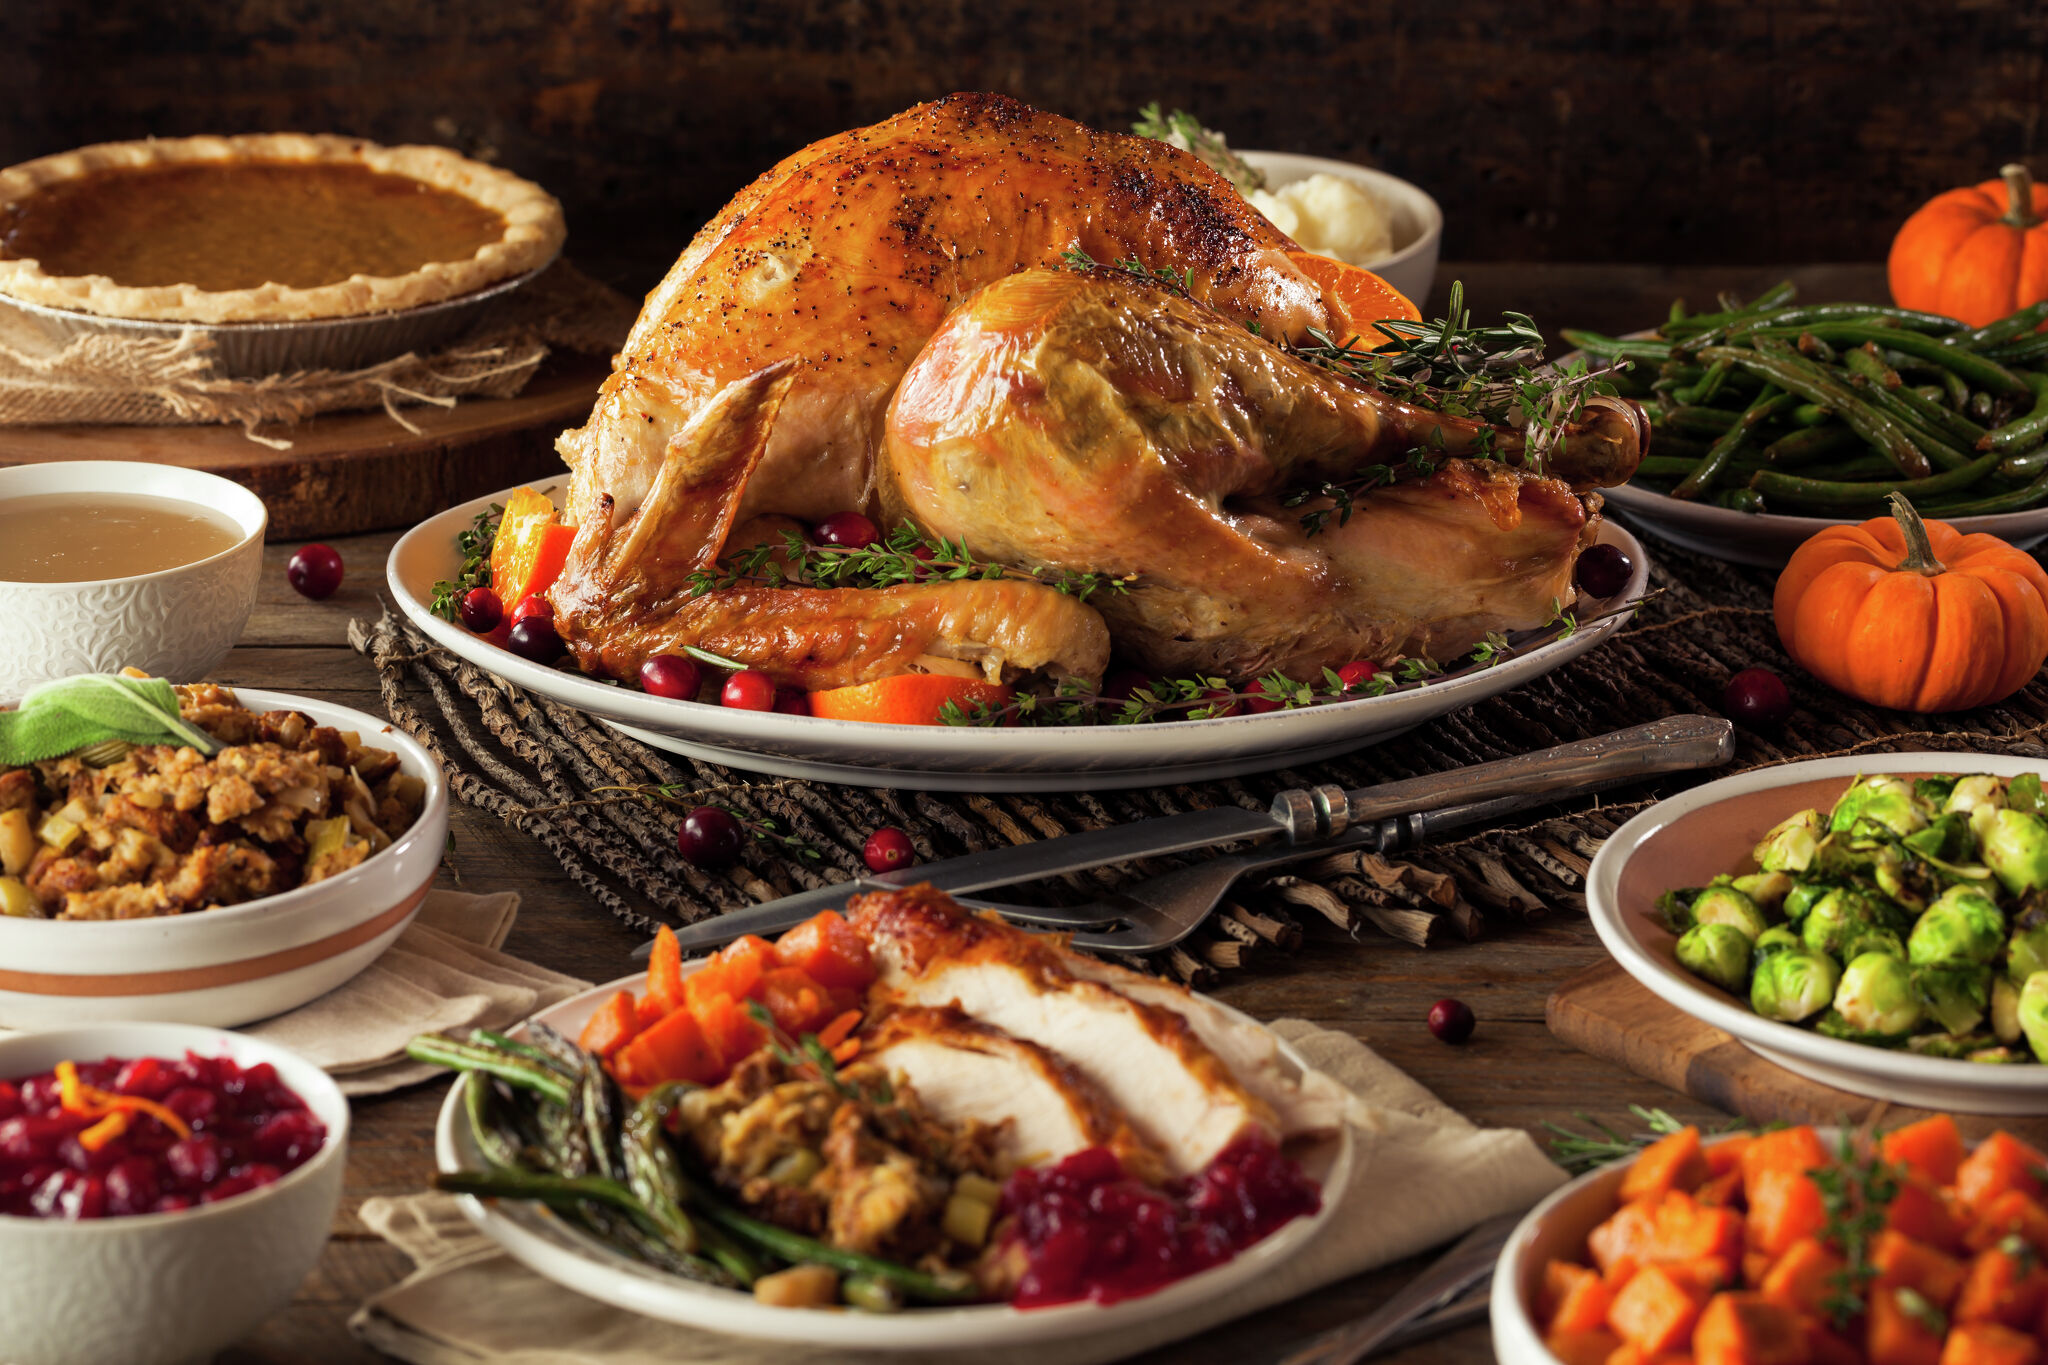 Where to pre-order Thanksgiving food in Midland